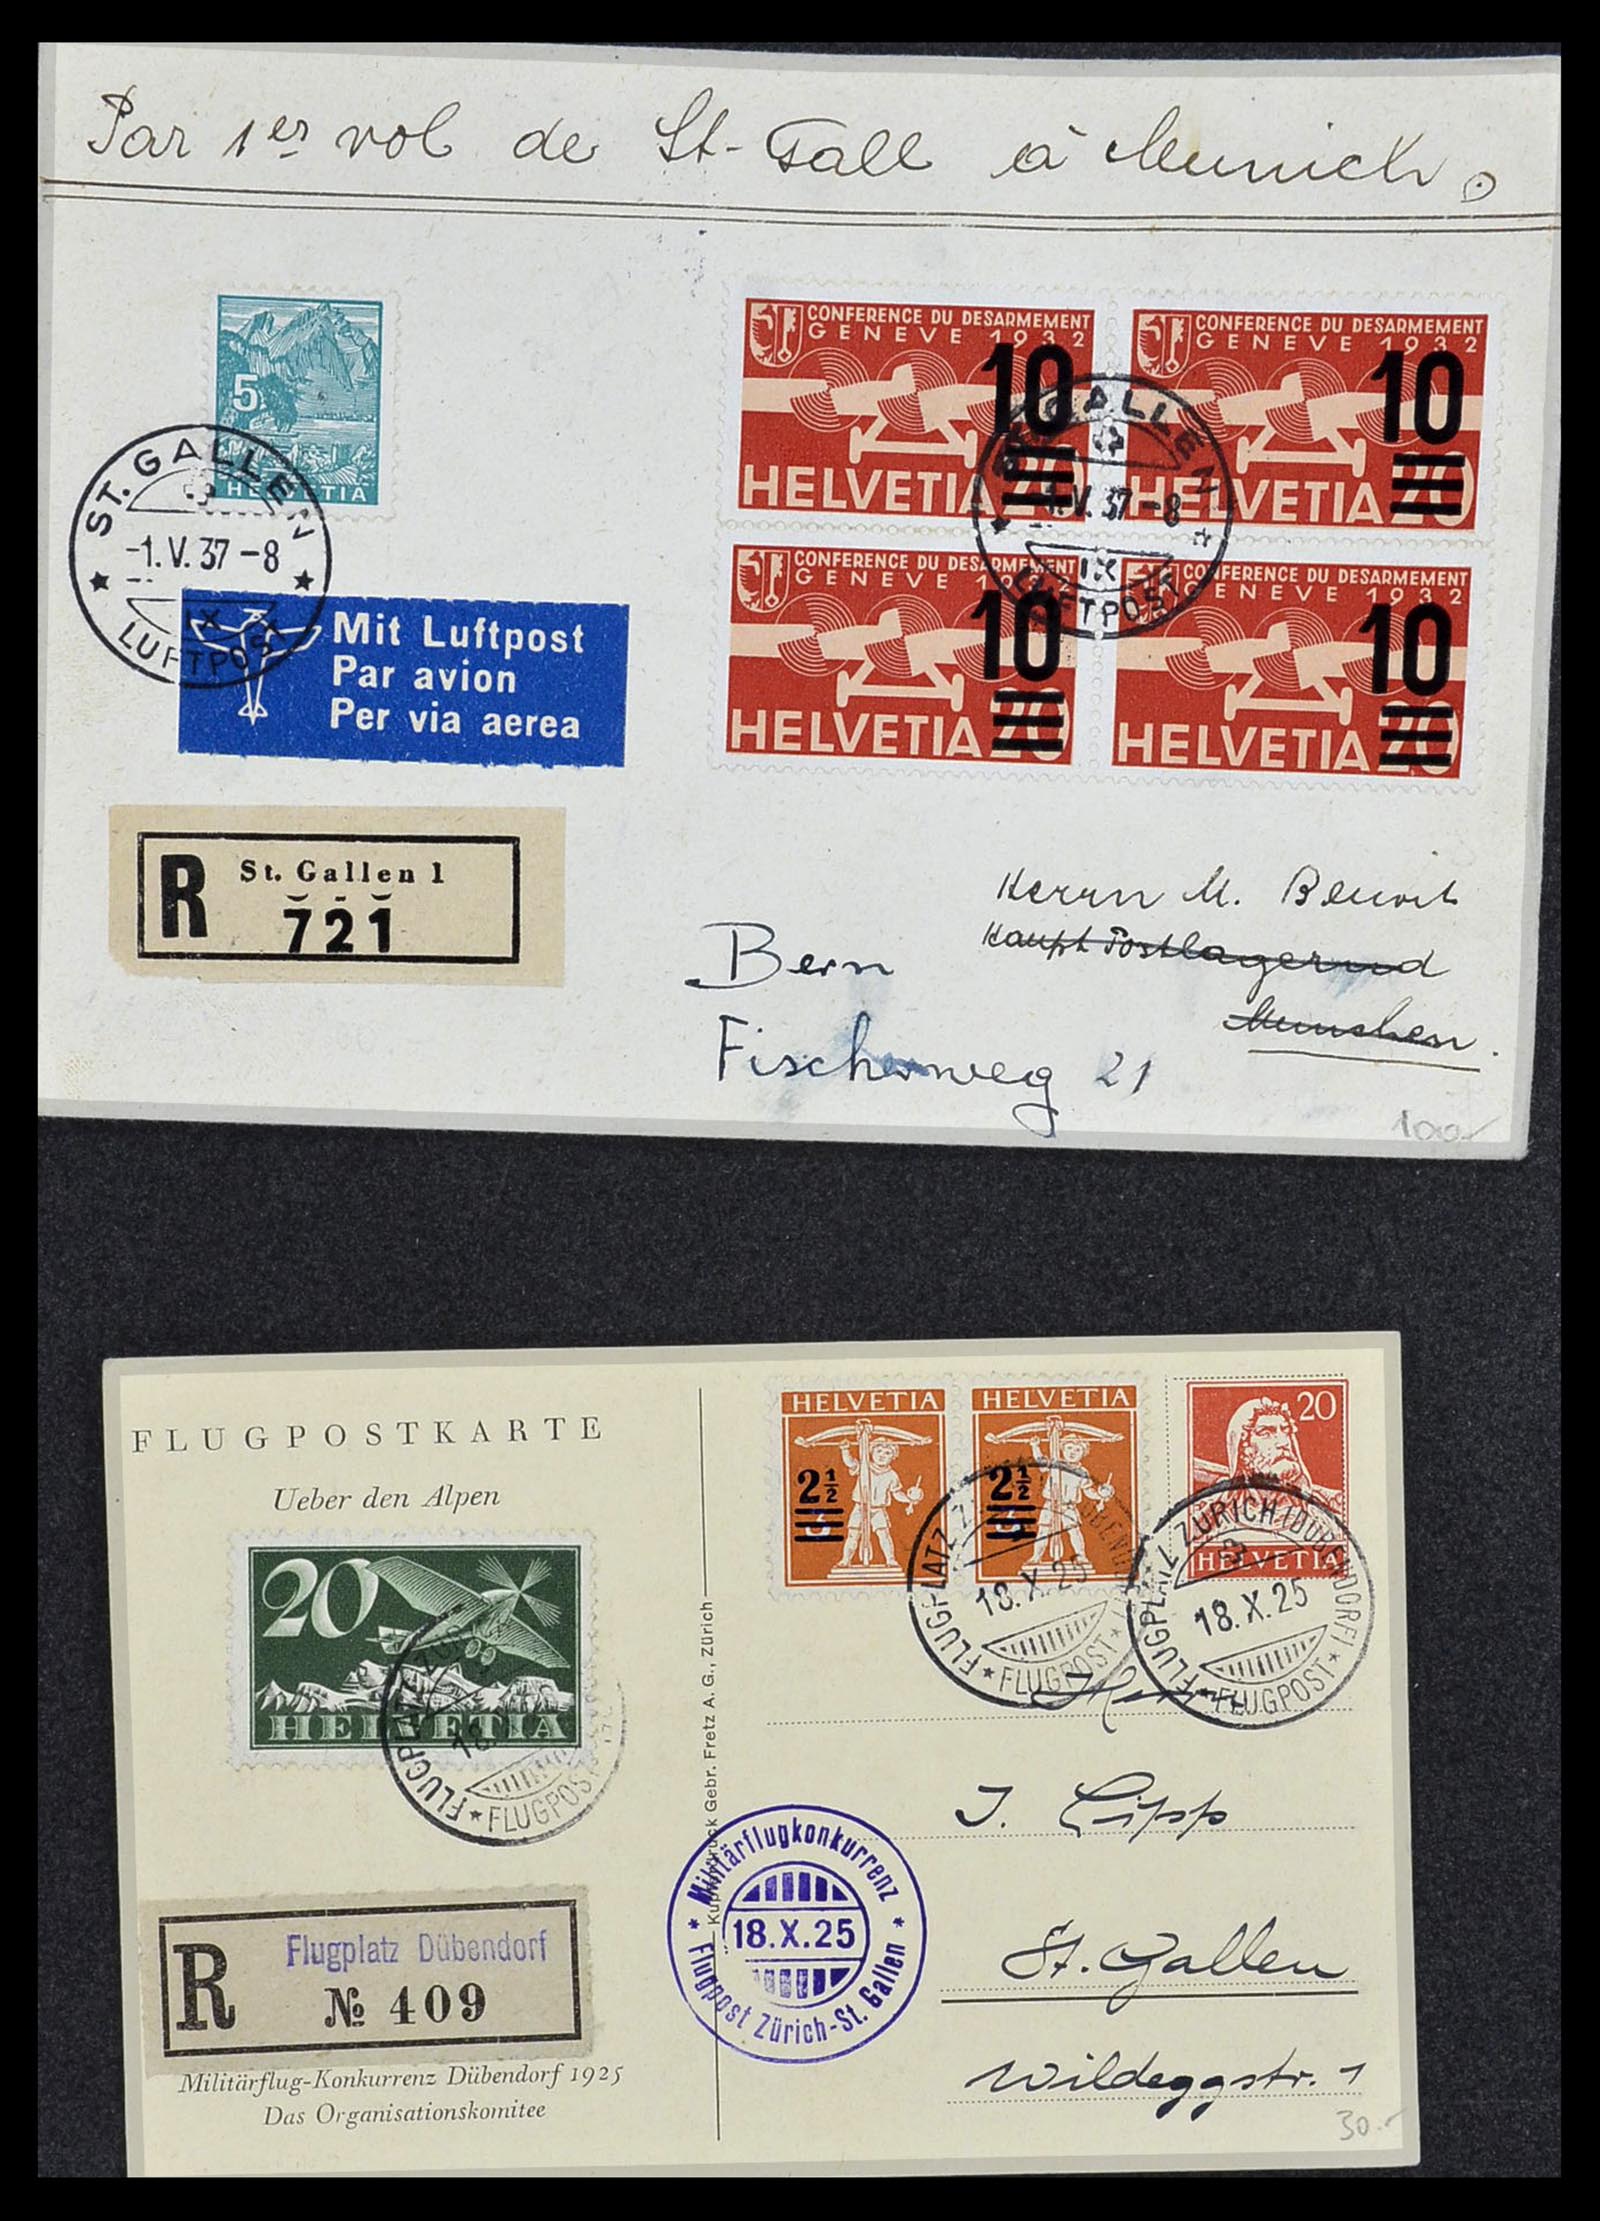 34141 023 - Stamp collection 34141 Switzerland airmail covers 1920-1960.